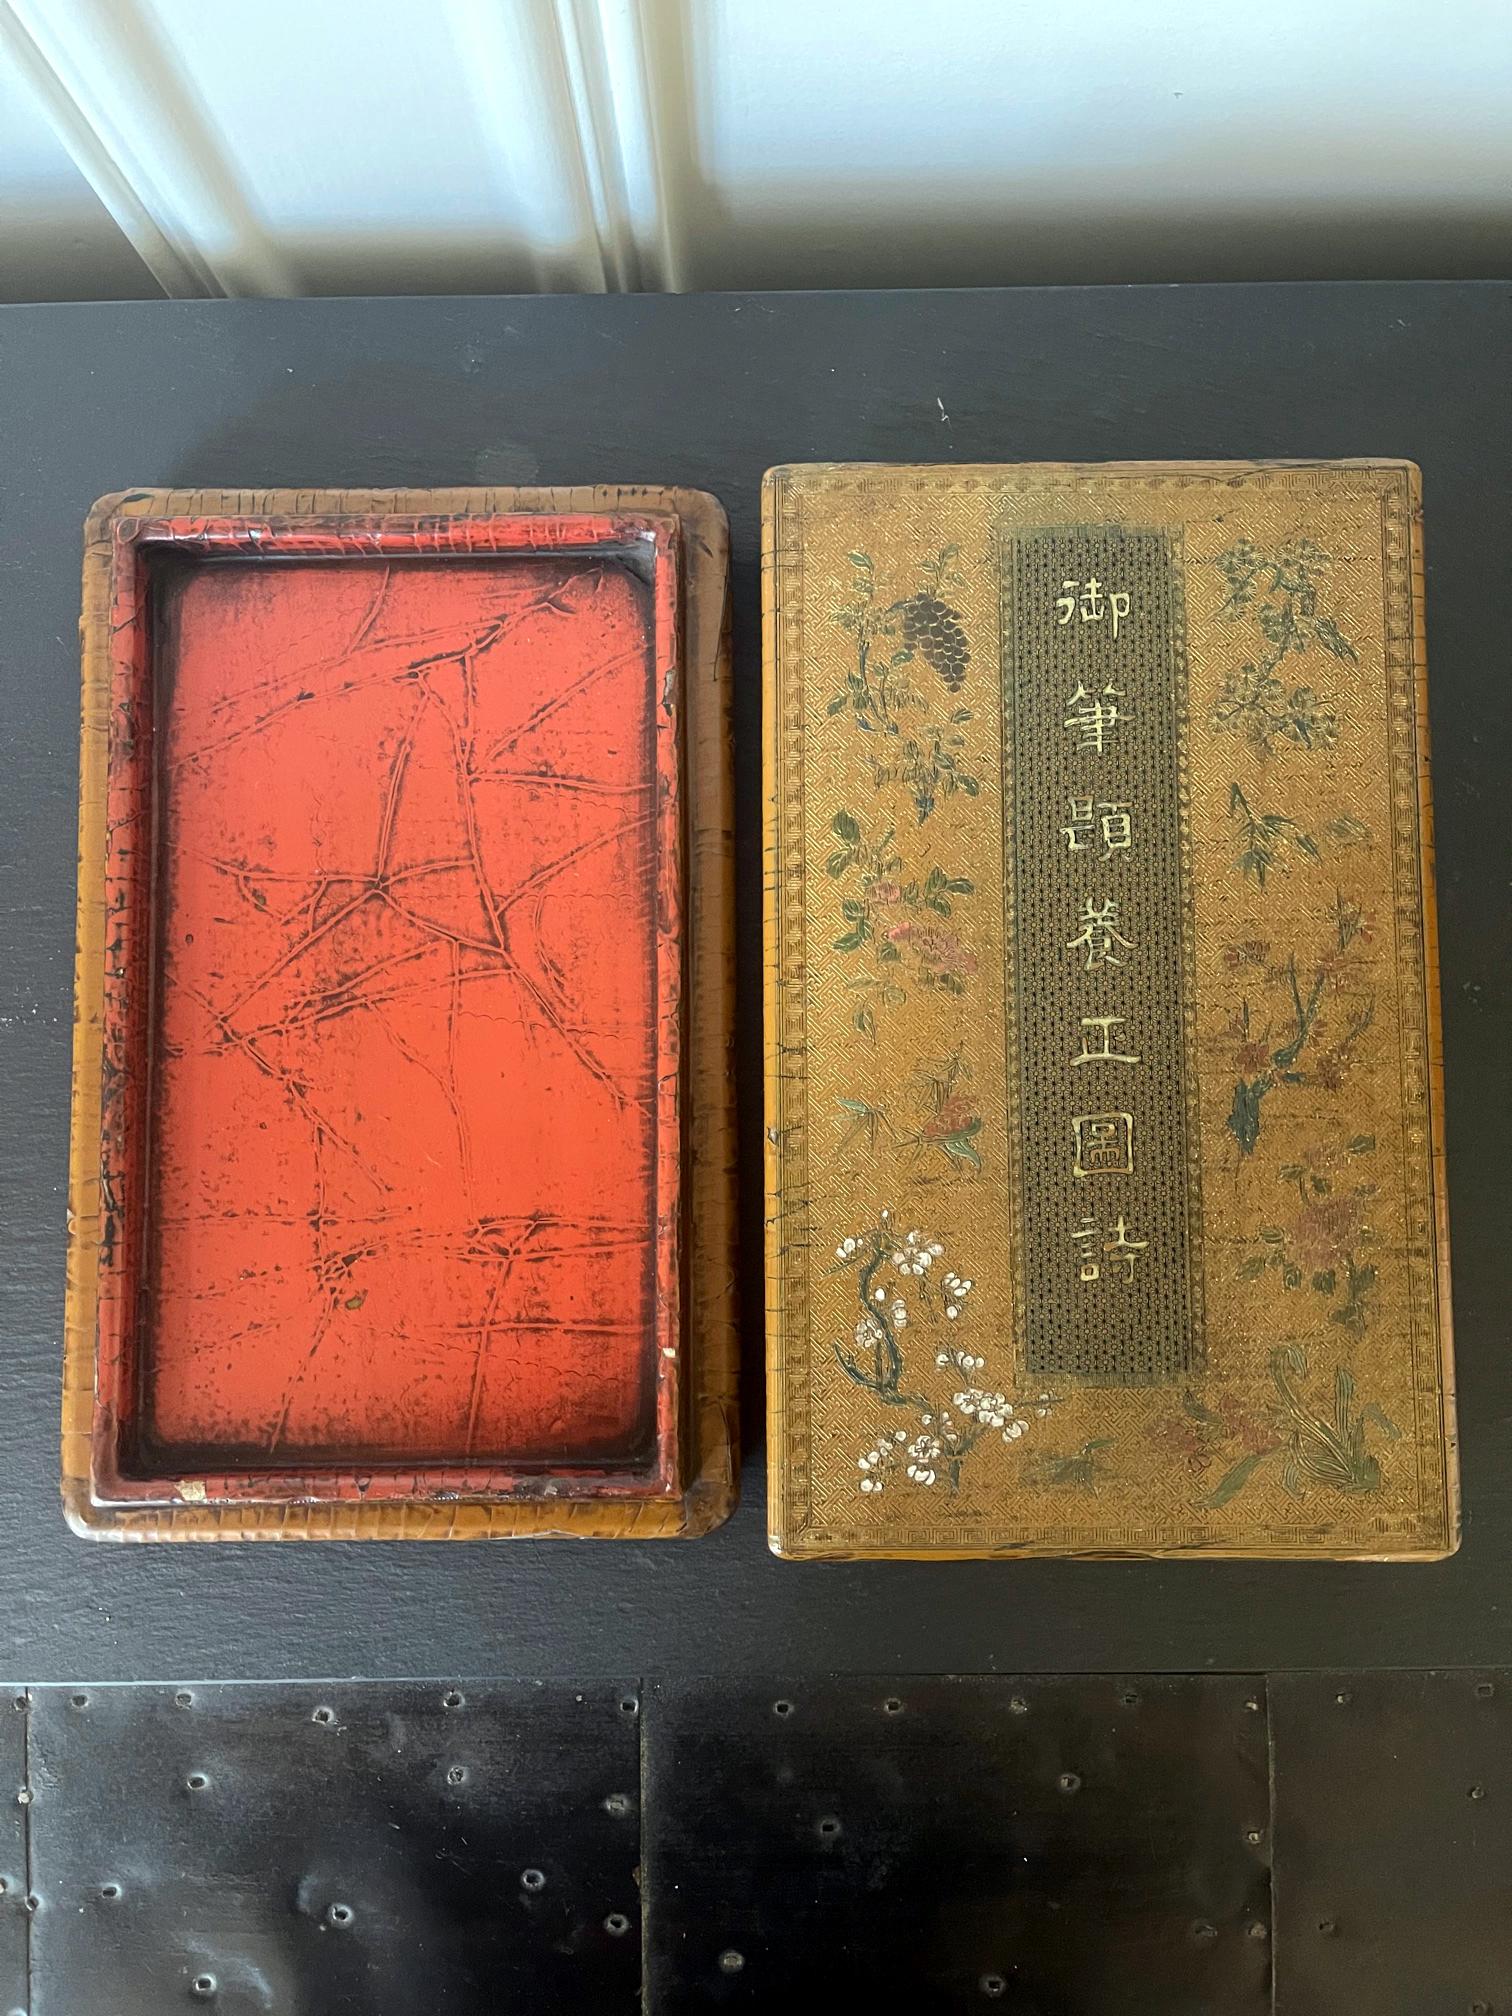 A Chinese Royal court lacquer box made specifically to contain the poem slips composed by Qing Dynasty emperor Qianlong (1711-1799). Although we are pretty certain that the current box was made in a later period (end of Qing dynasty to Republic